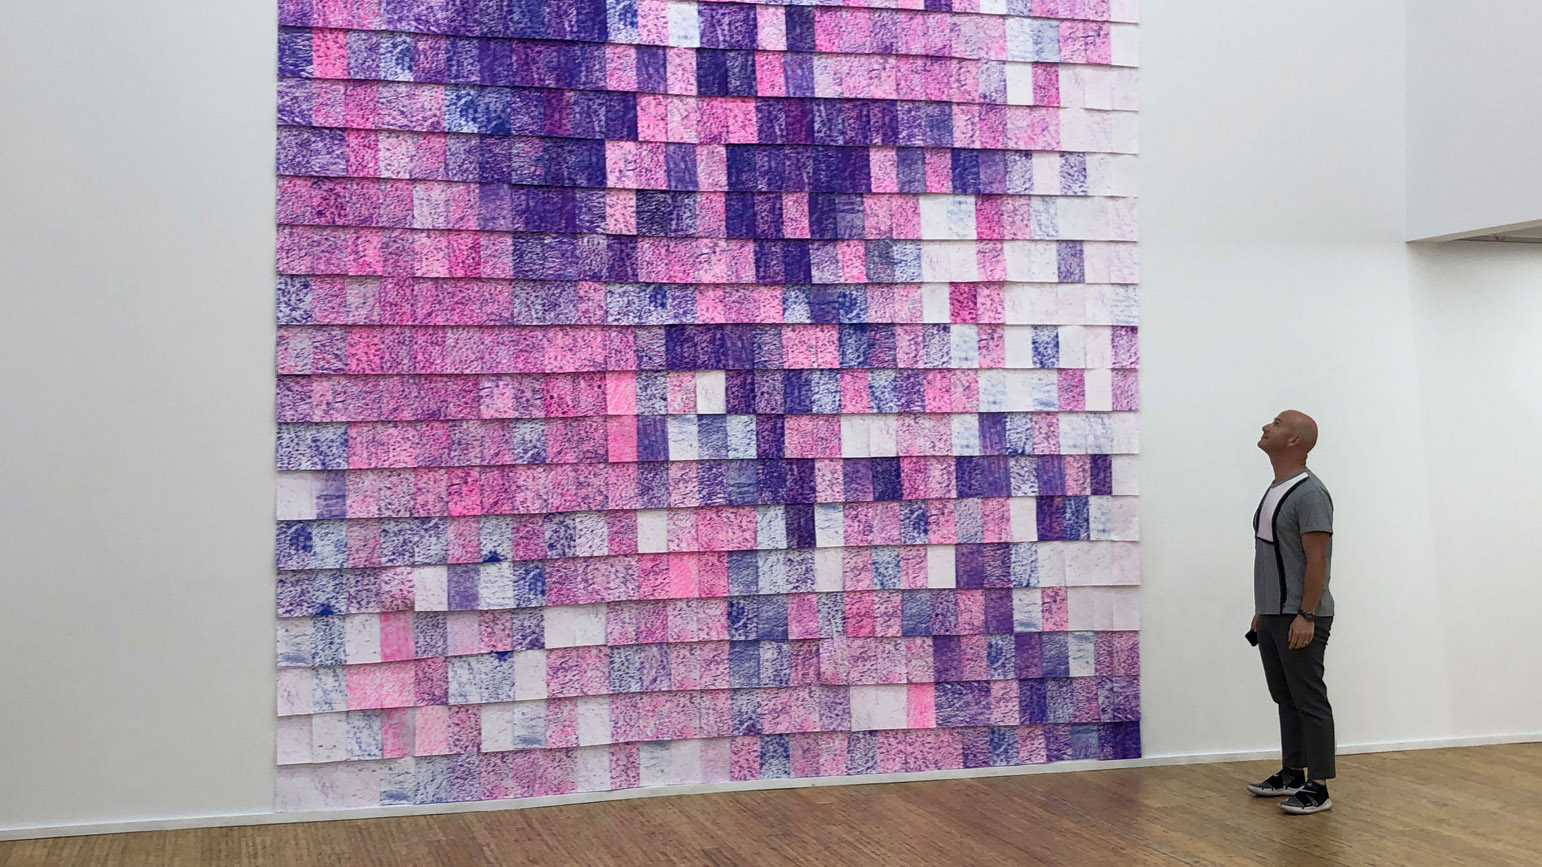 Photograph of a man looking at a large installation of blue and pink sheets of rubbings of road texture